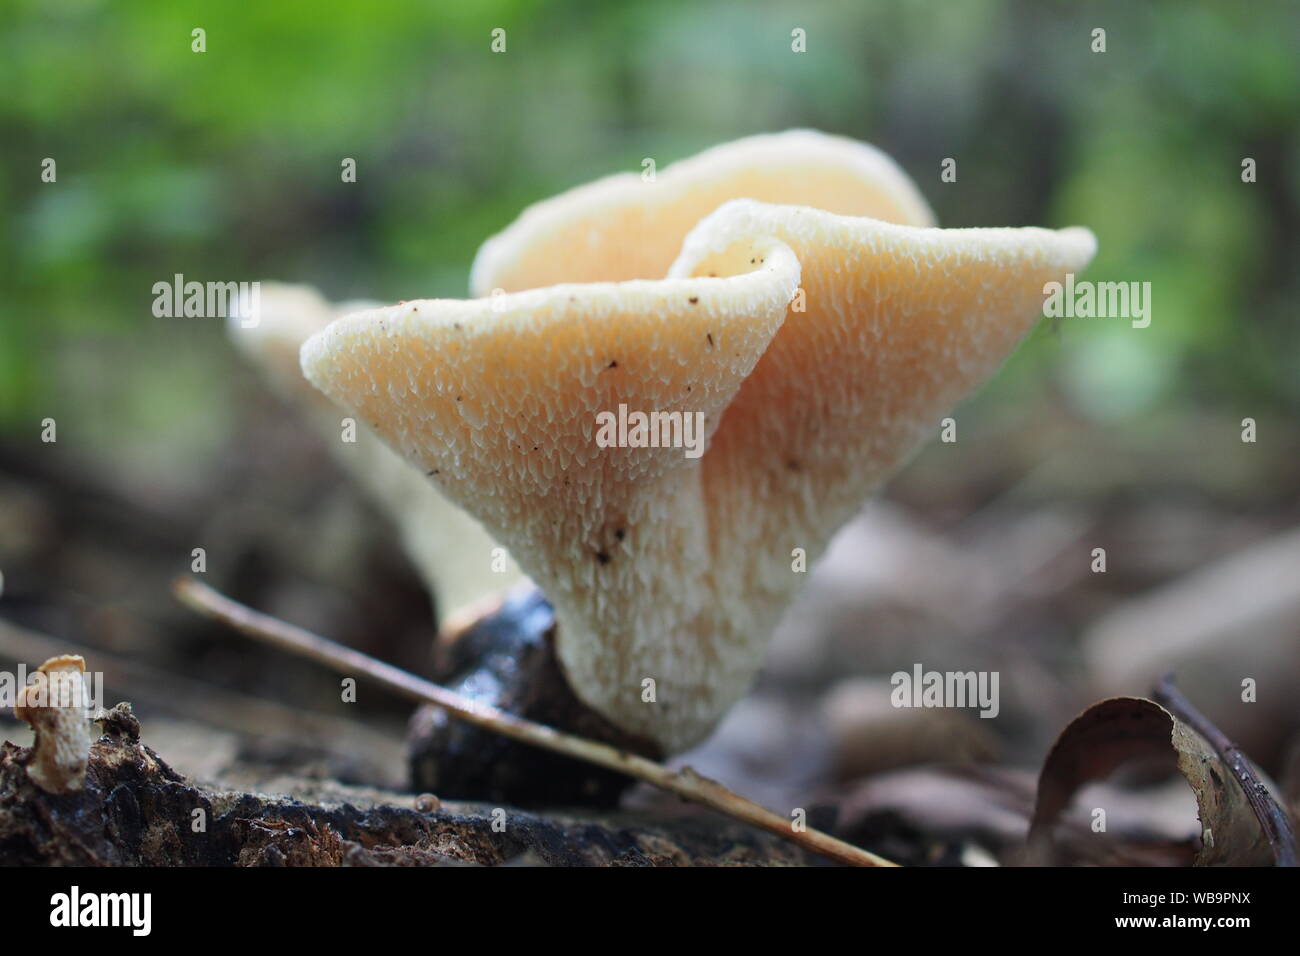 Pig's ear (Gomphus clavatus) mushroom in a forest outside of Osgoode, Ontario, Canada. Stock Photo